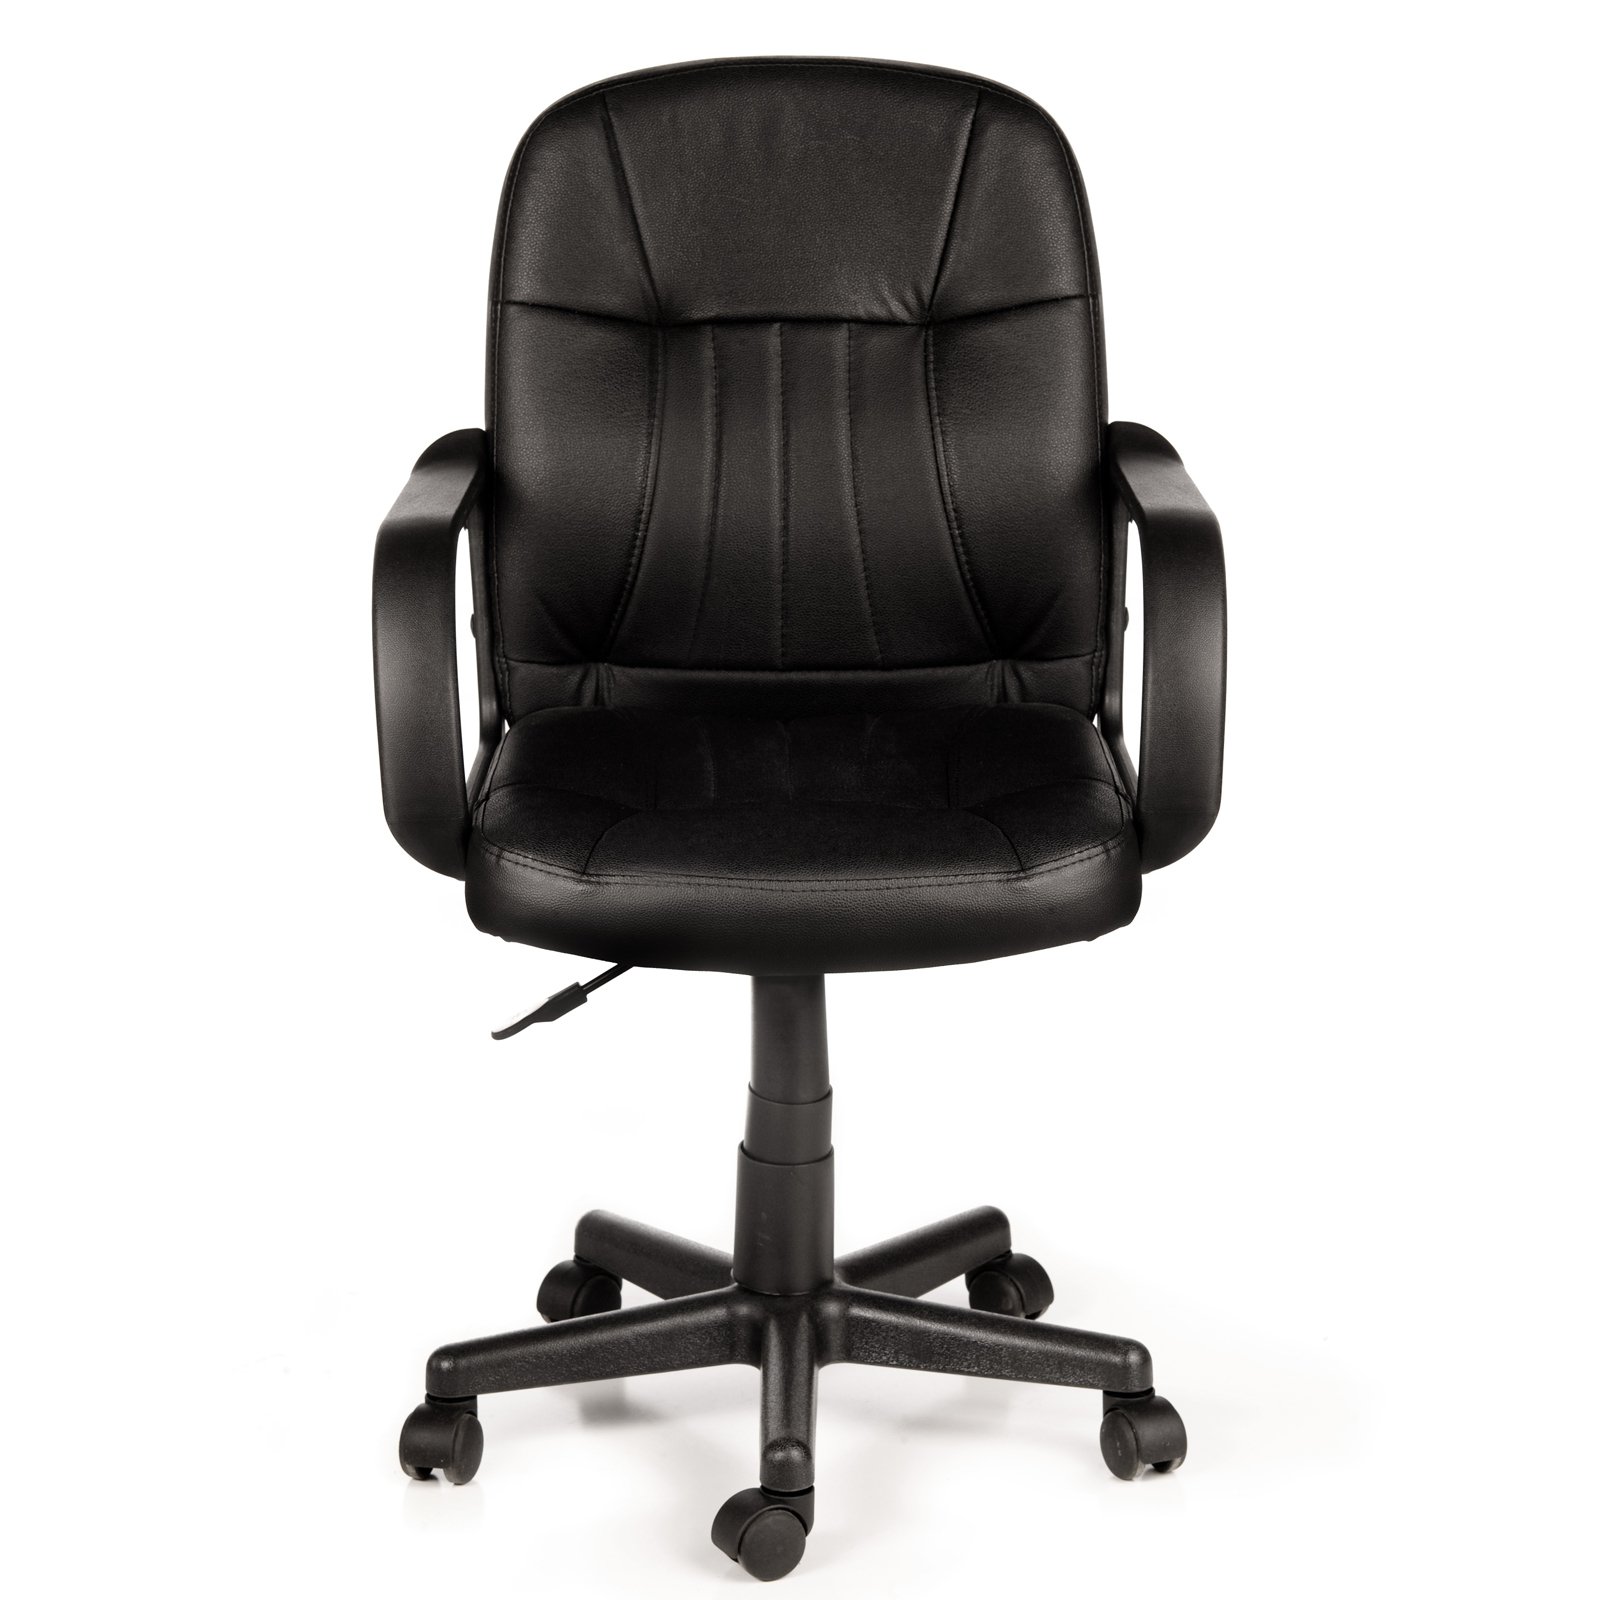 Comfort Products 60-5607M Mid-Back Leather Office Chair, Black - image 1 of 6